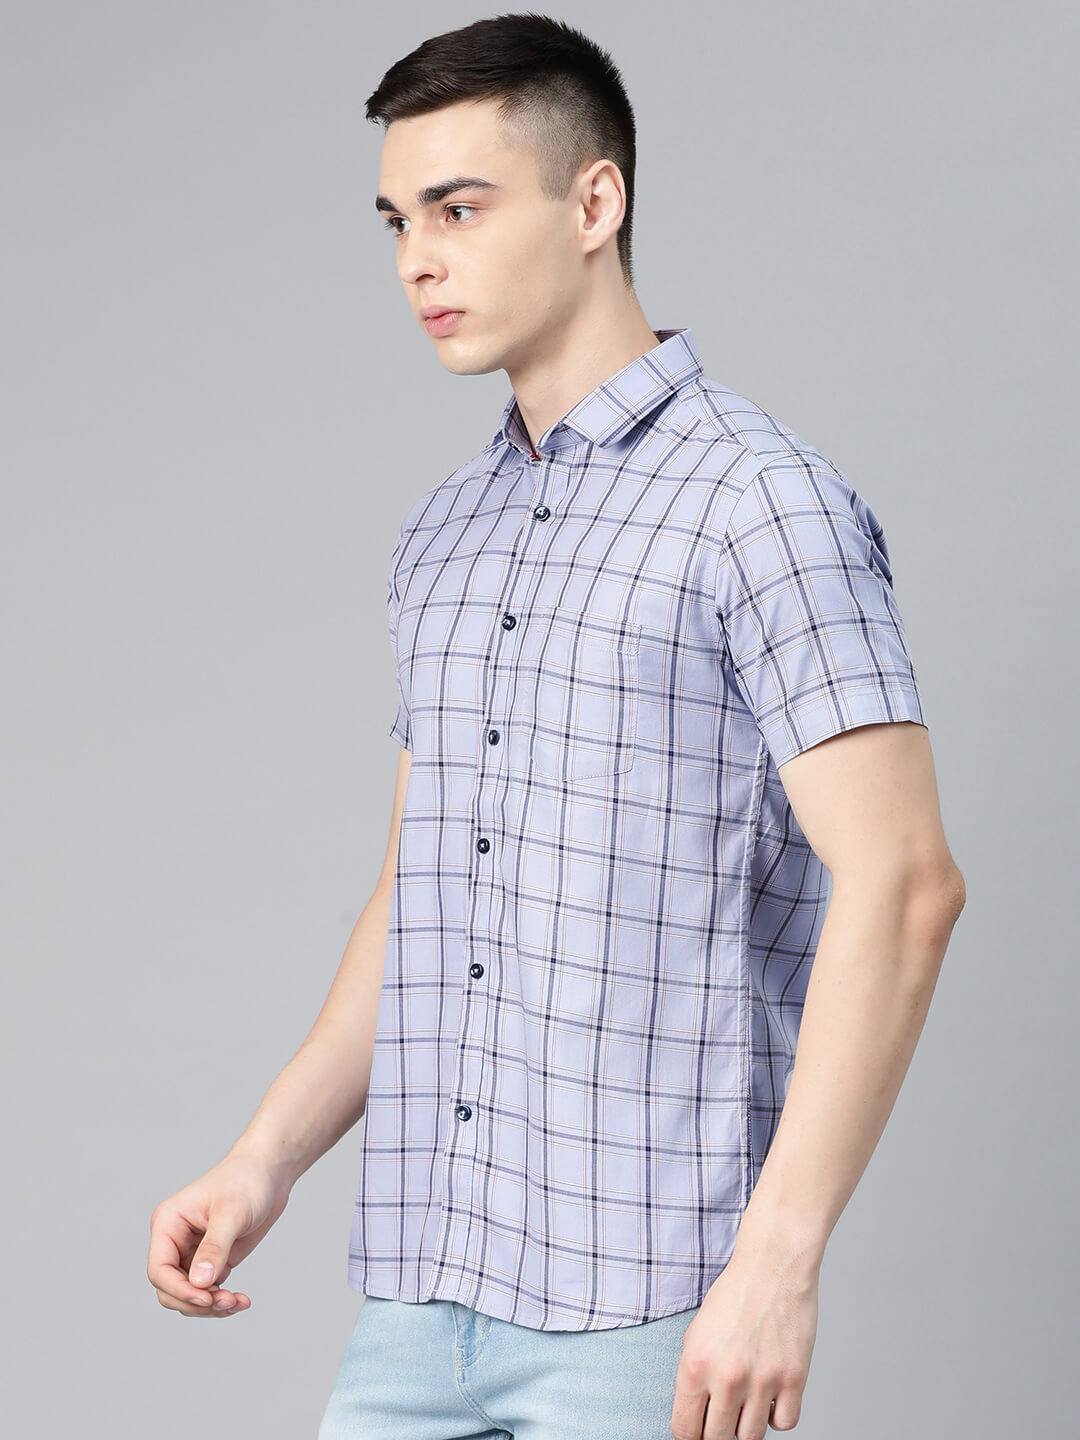 5thanfold Men's Casual Pure Cotton Half Sleeve Checkered Blue Slim Fit Shirt